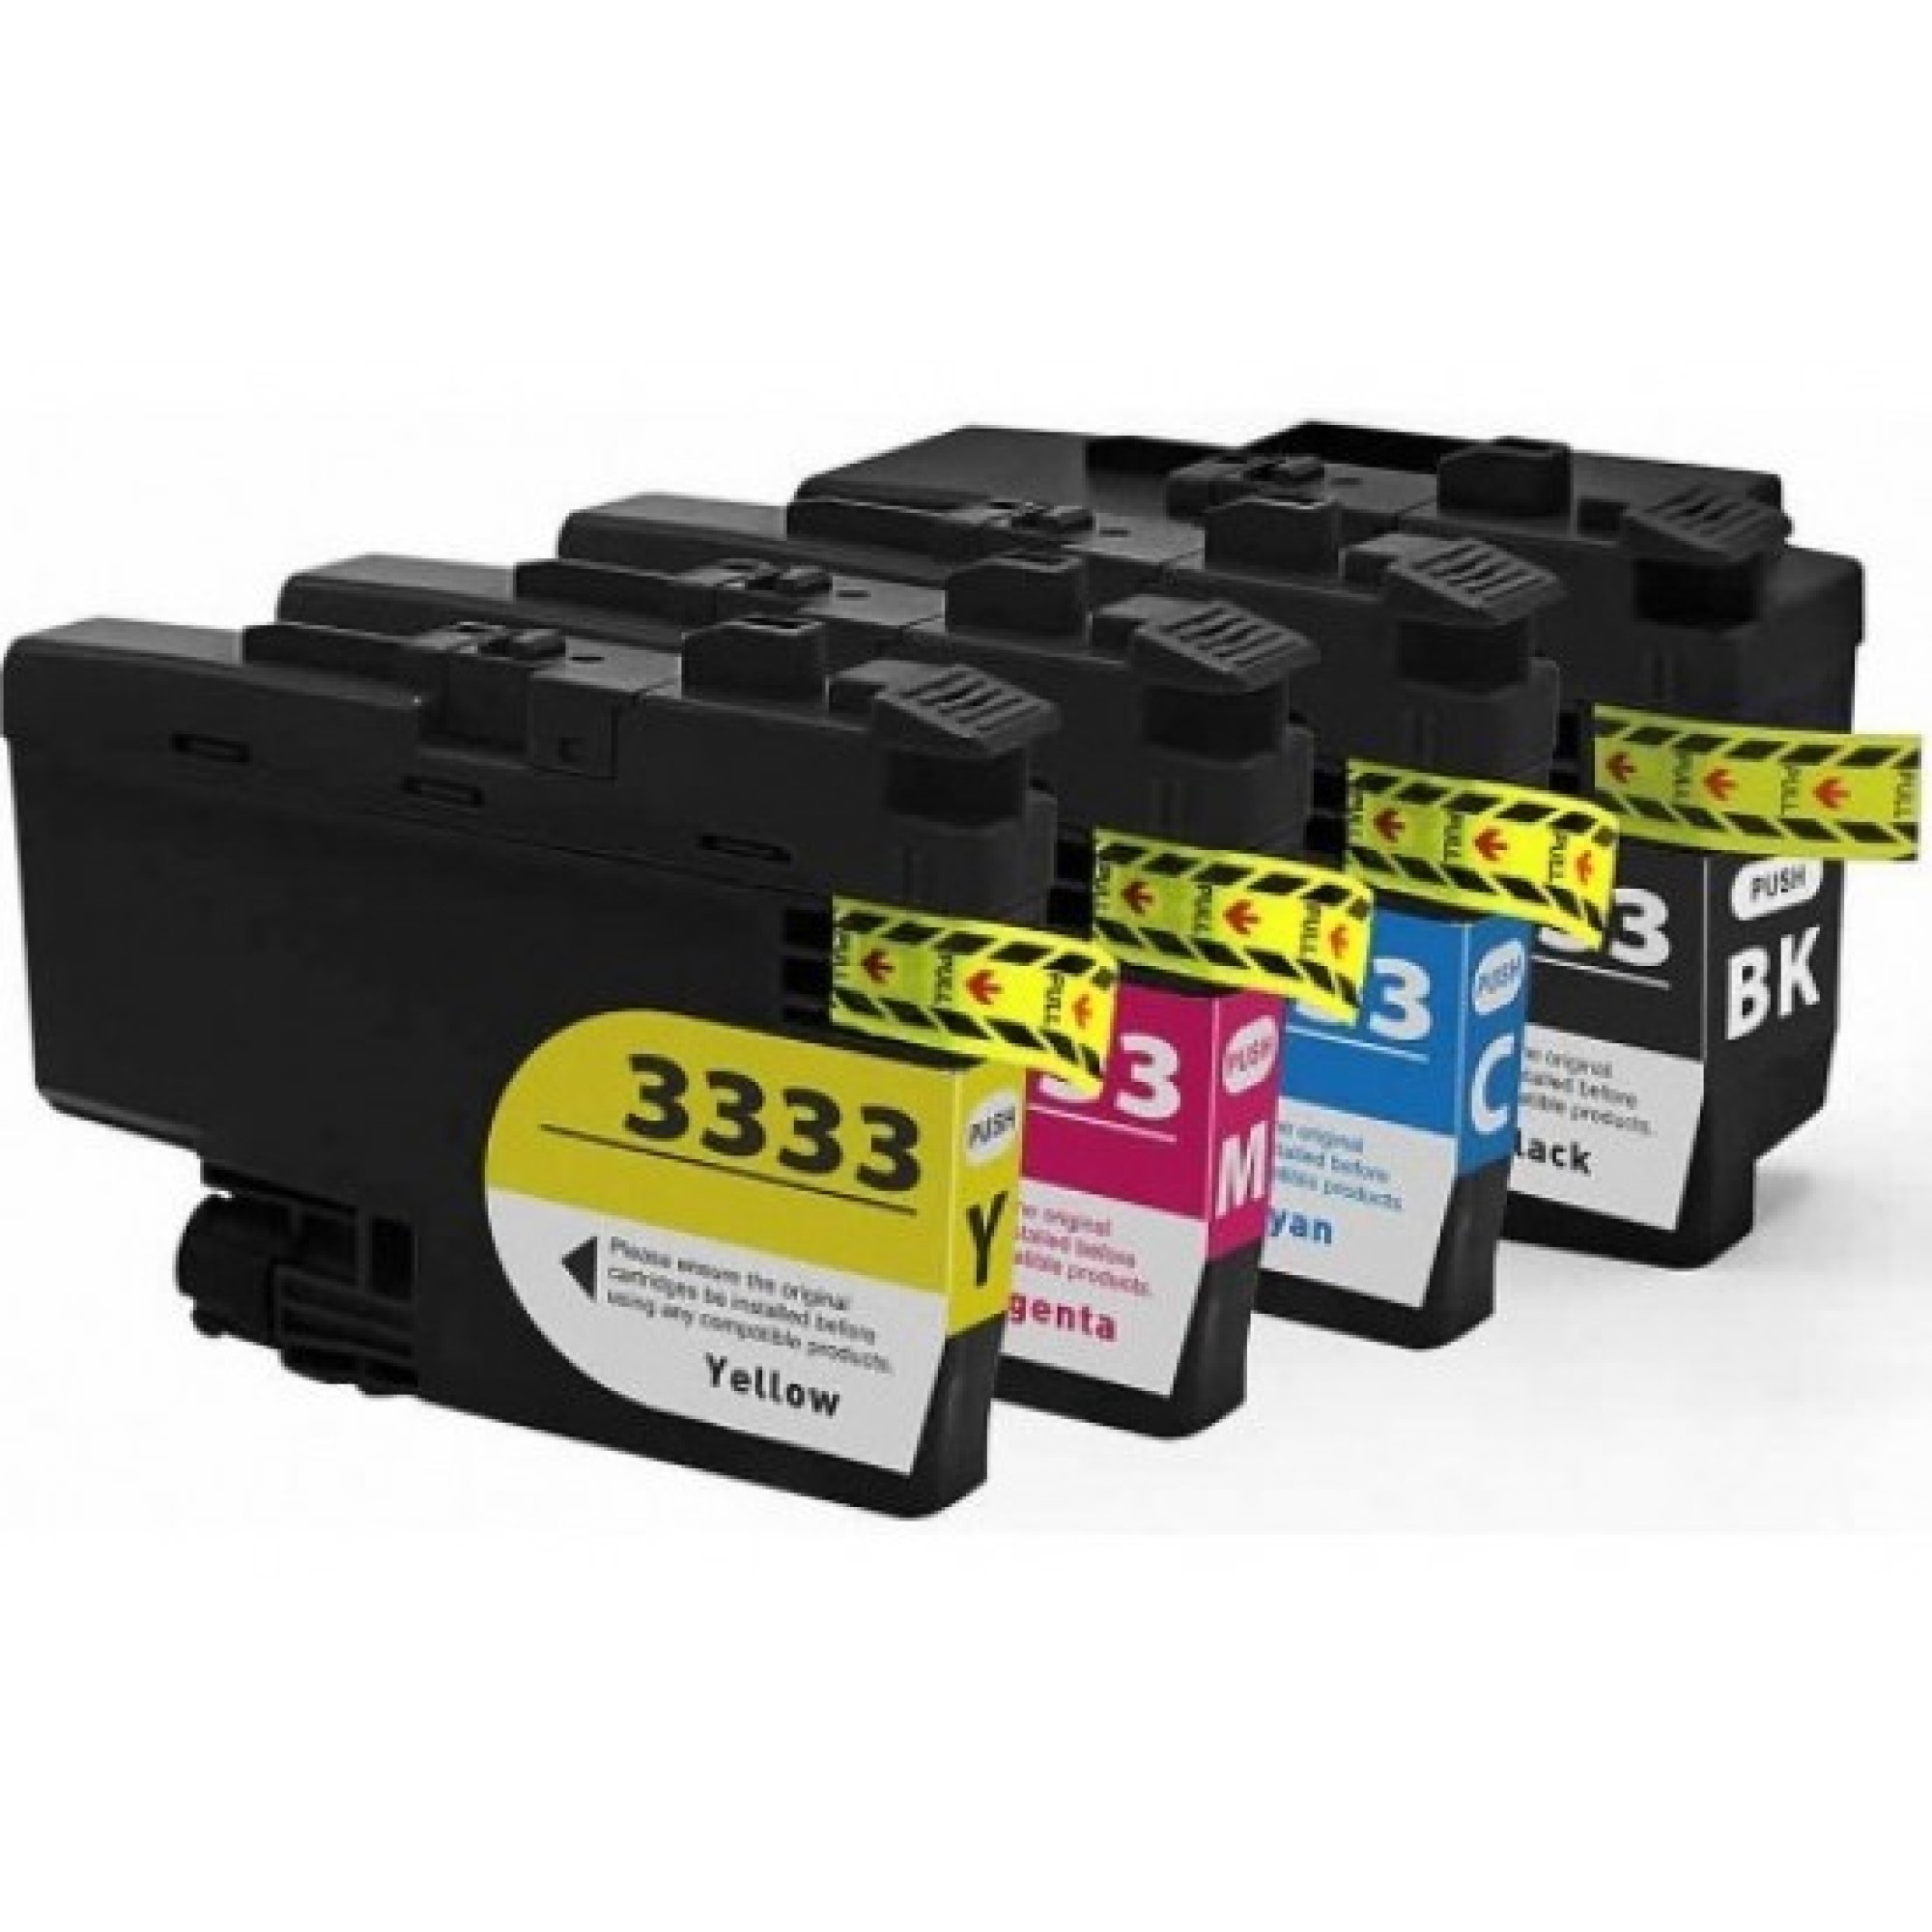 Brother lc3333 Ink Cartridge Black